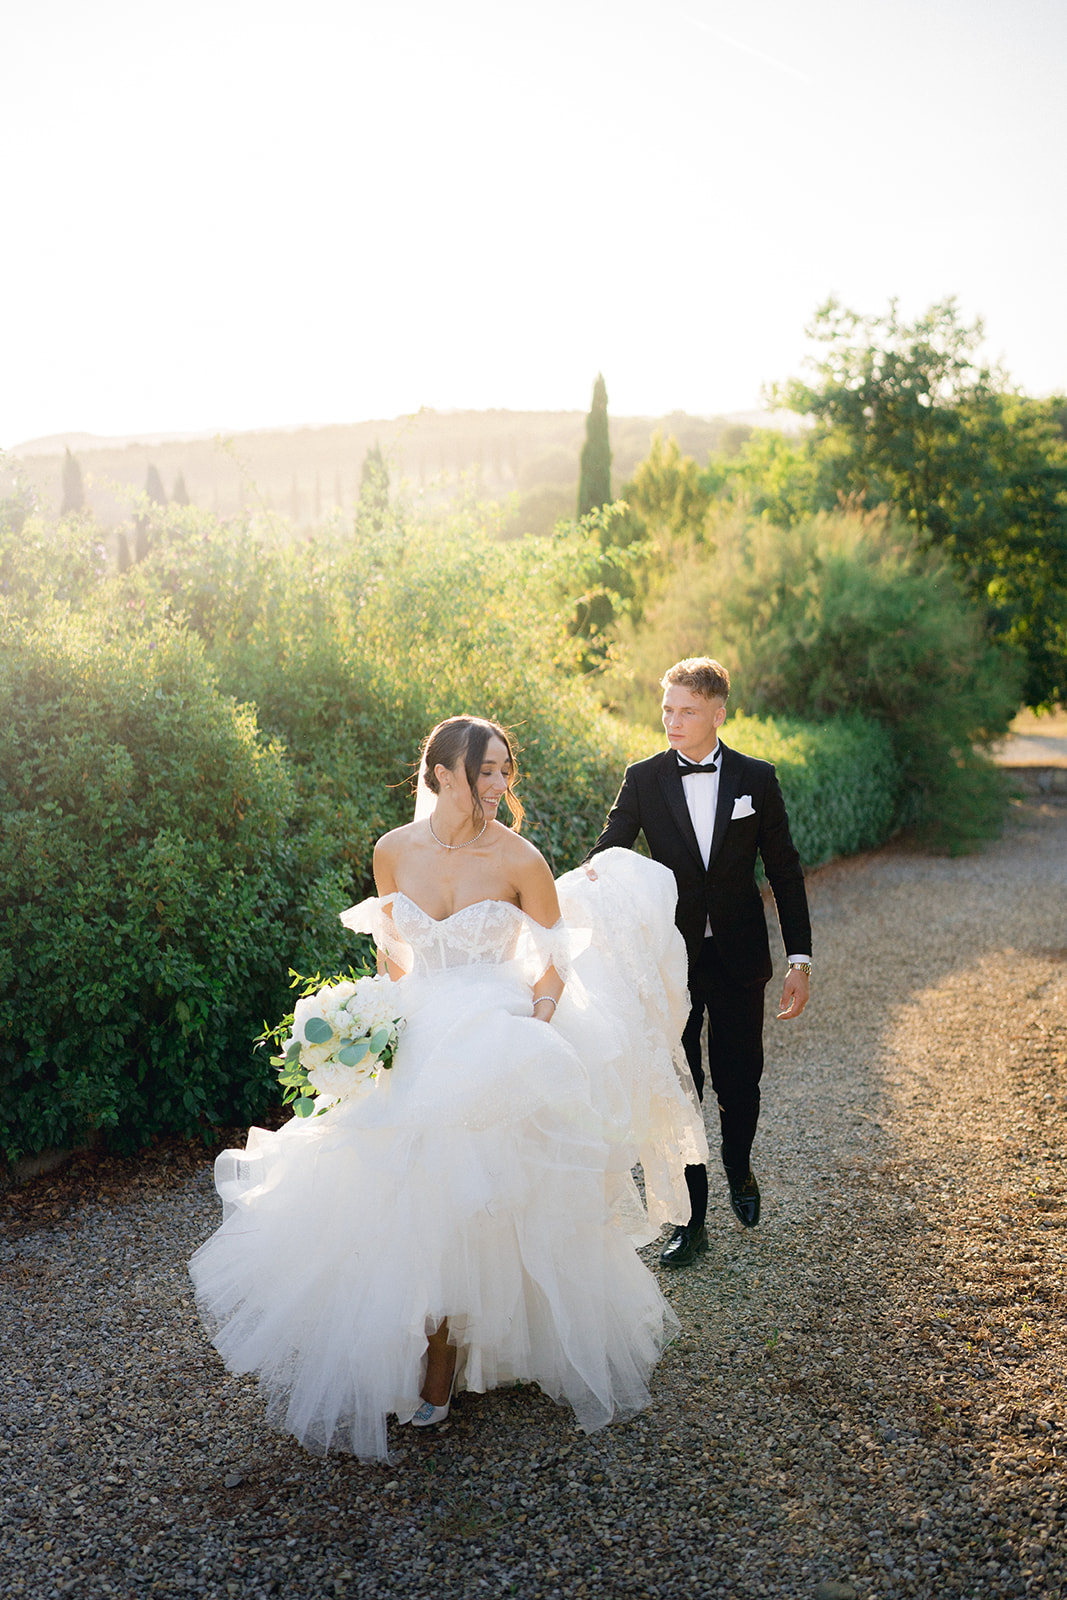 The groom helps the bride with the train of her dress as they walk on gravel